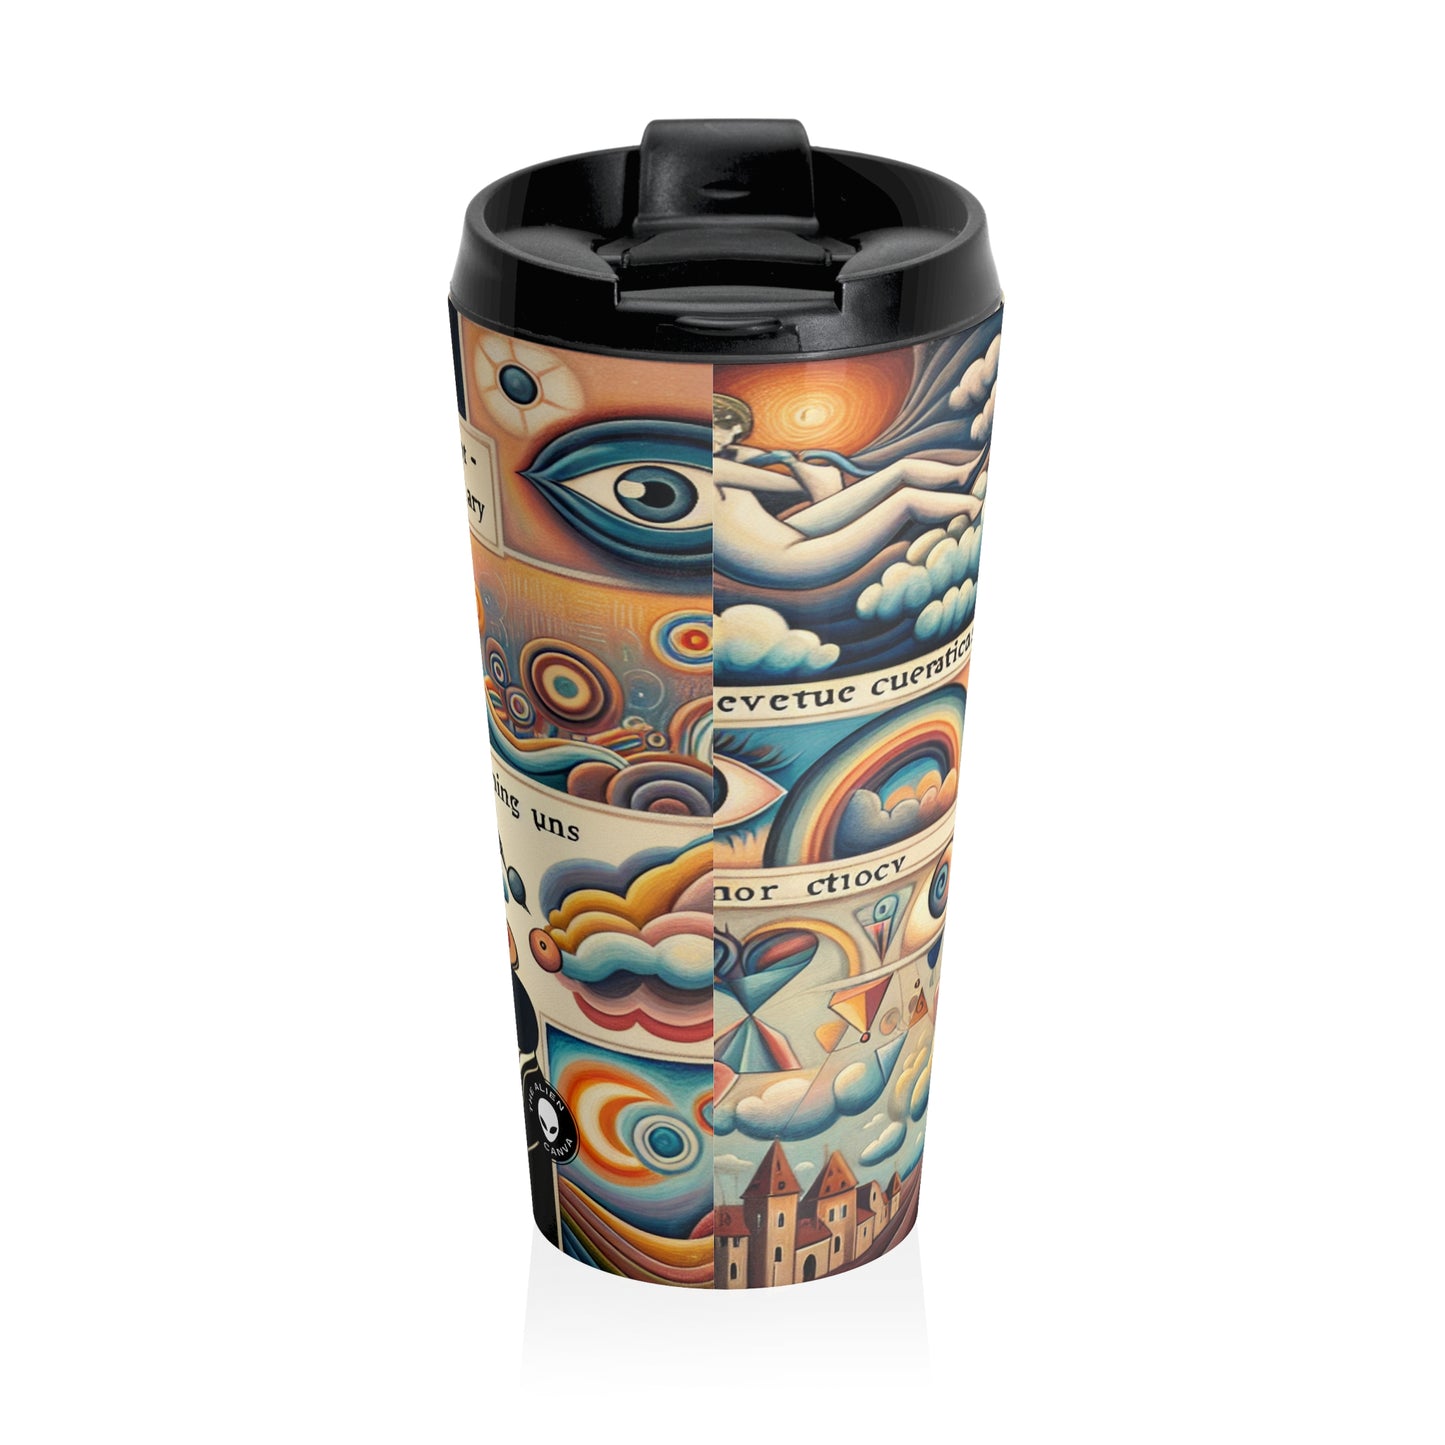 "Magical Tea Time: The Whimsical Transformation of a Teapot" - The Alien Stainless Steel Travel Mug Naïve Surrealism